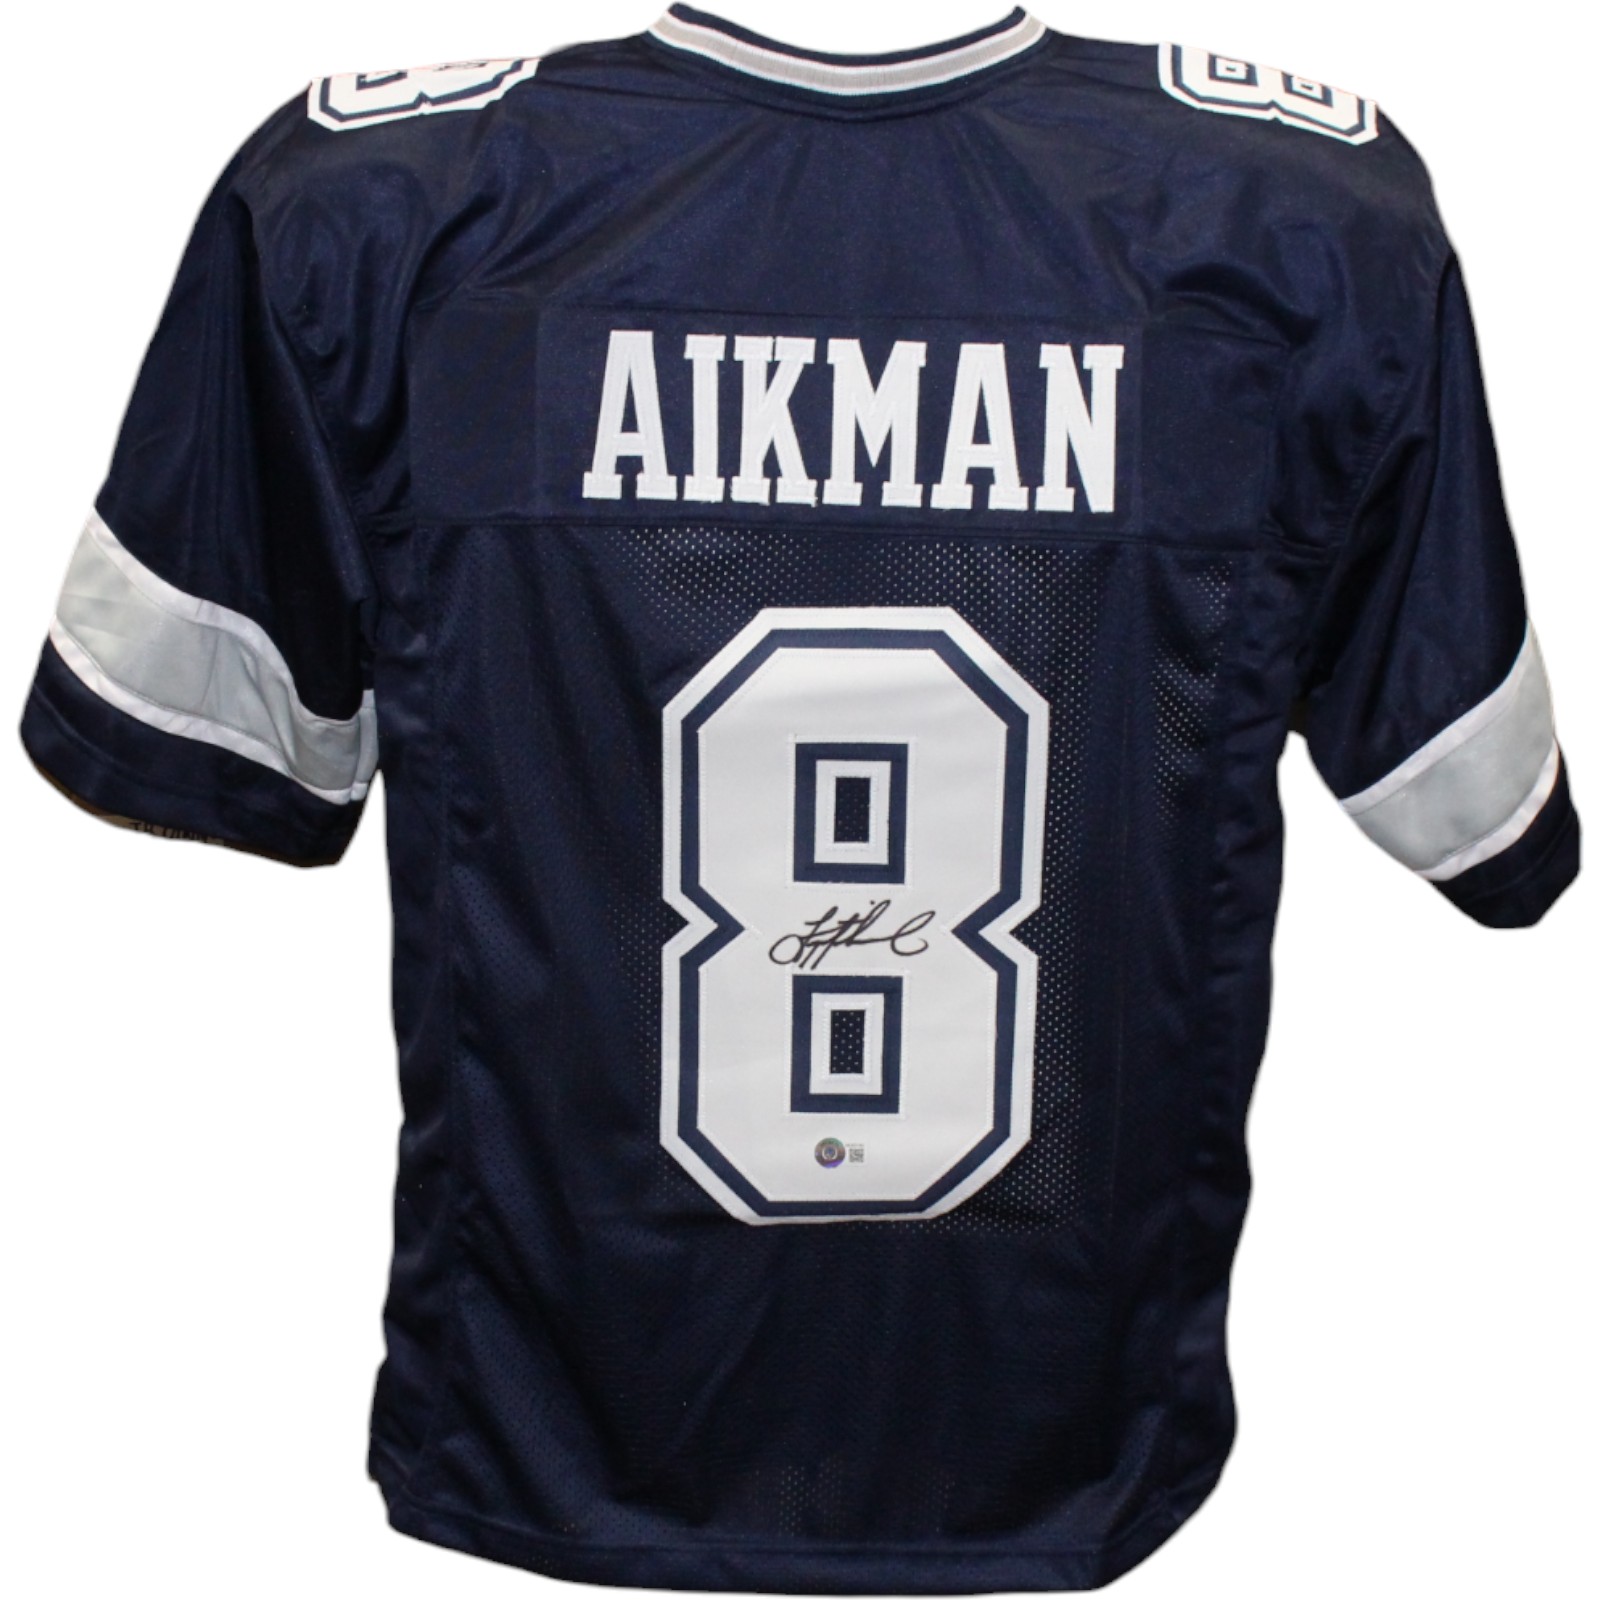 Troy Aikman Autographed/Signed Pro Style Navy Jersey Beckett